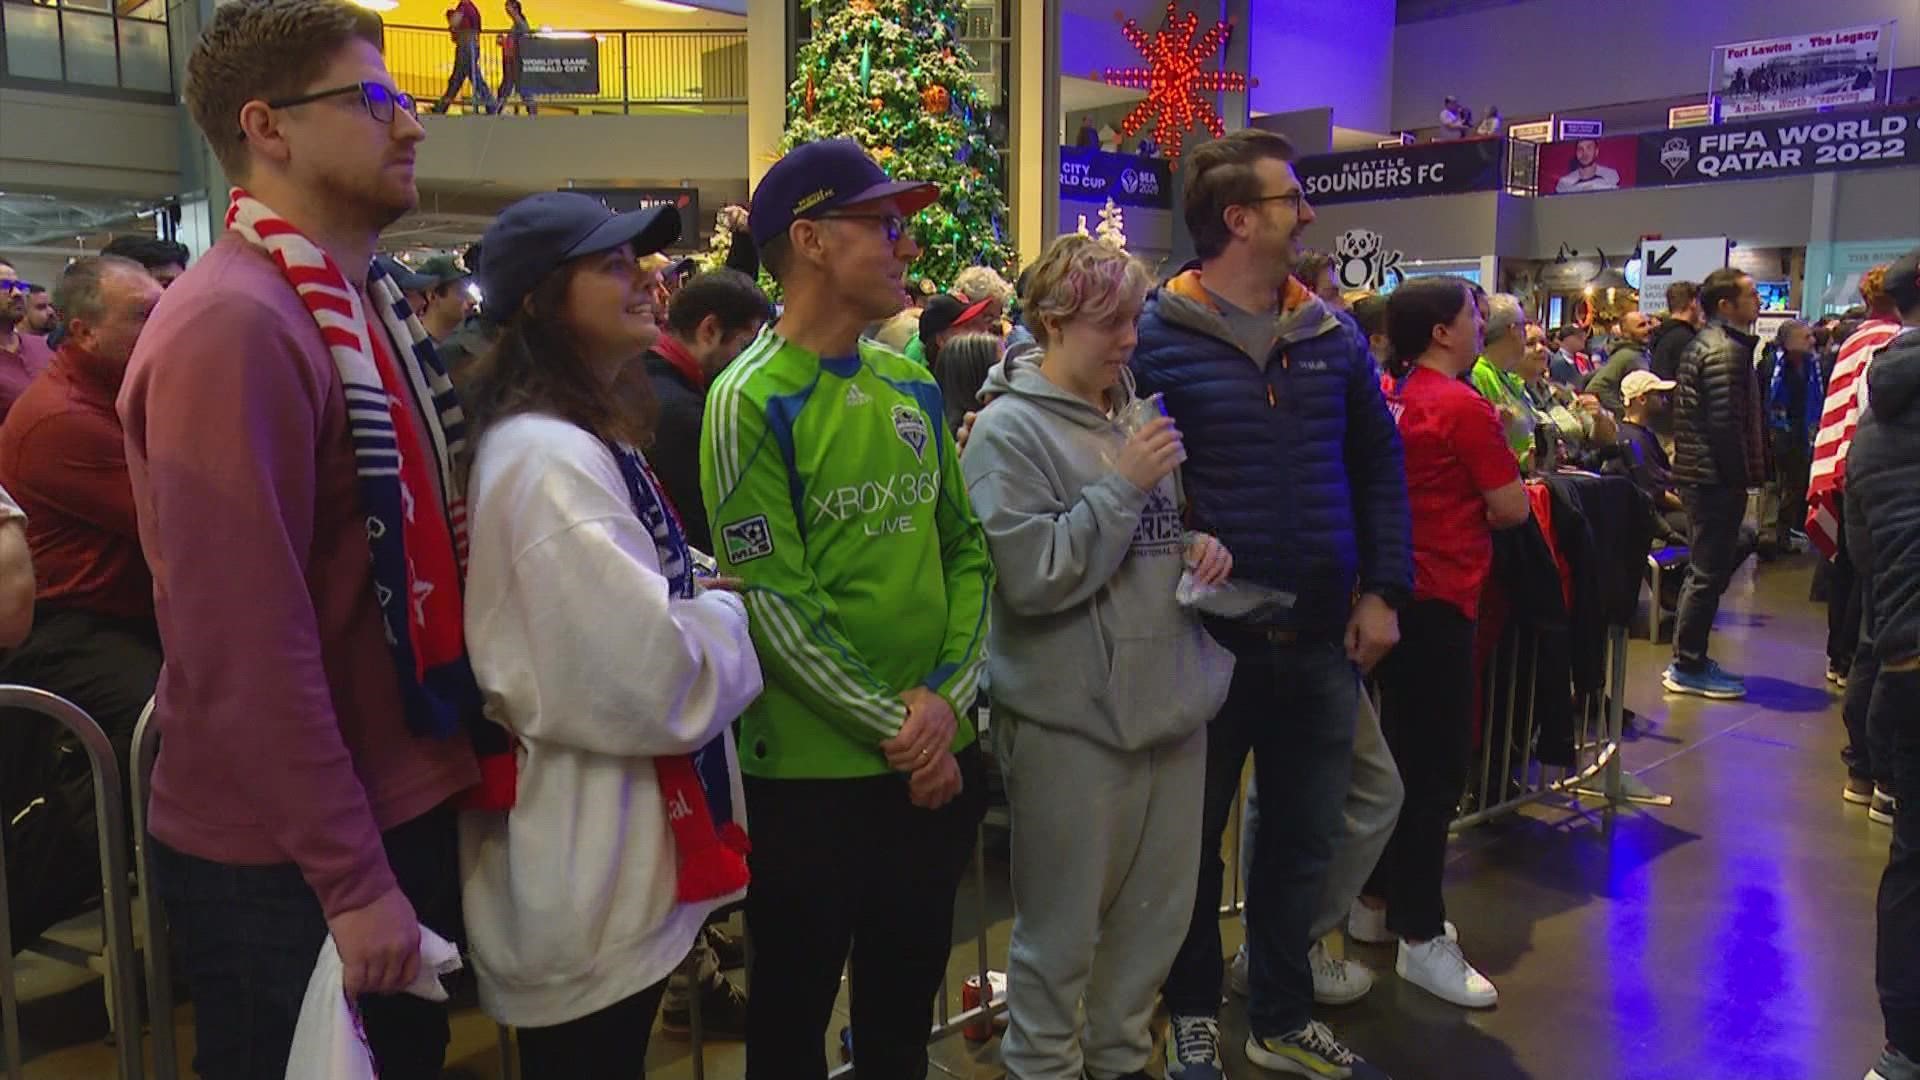 Watch parties were held around the city when the U.S. men's national soccer team played England on Nov. 25.